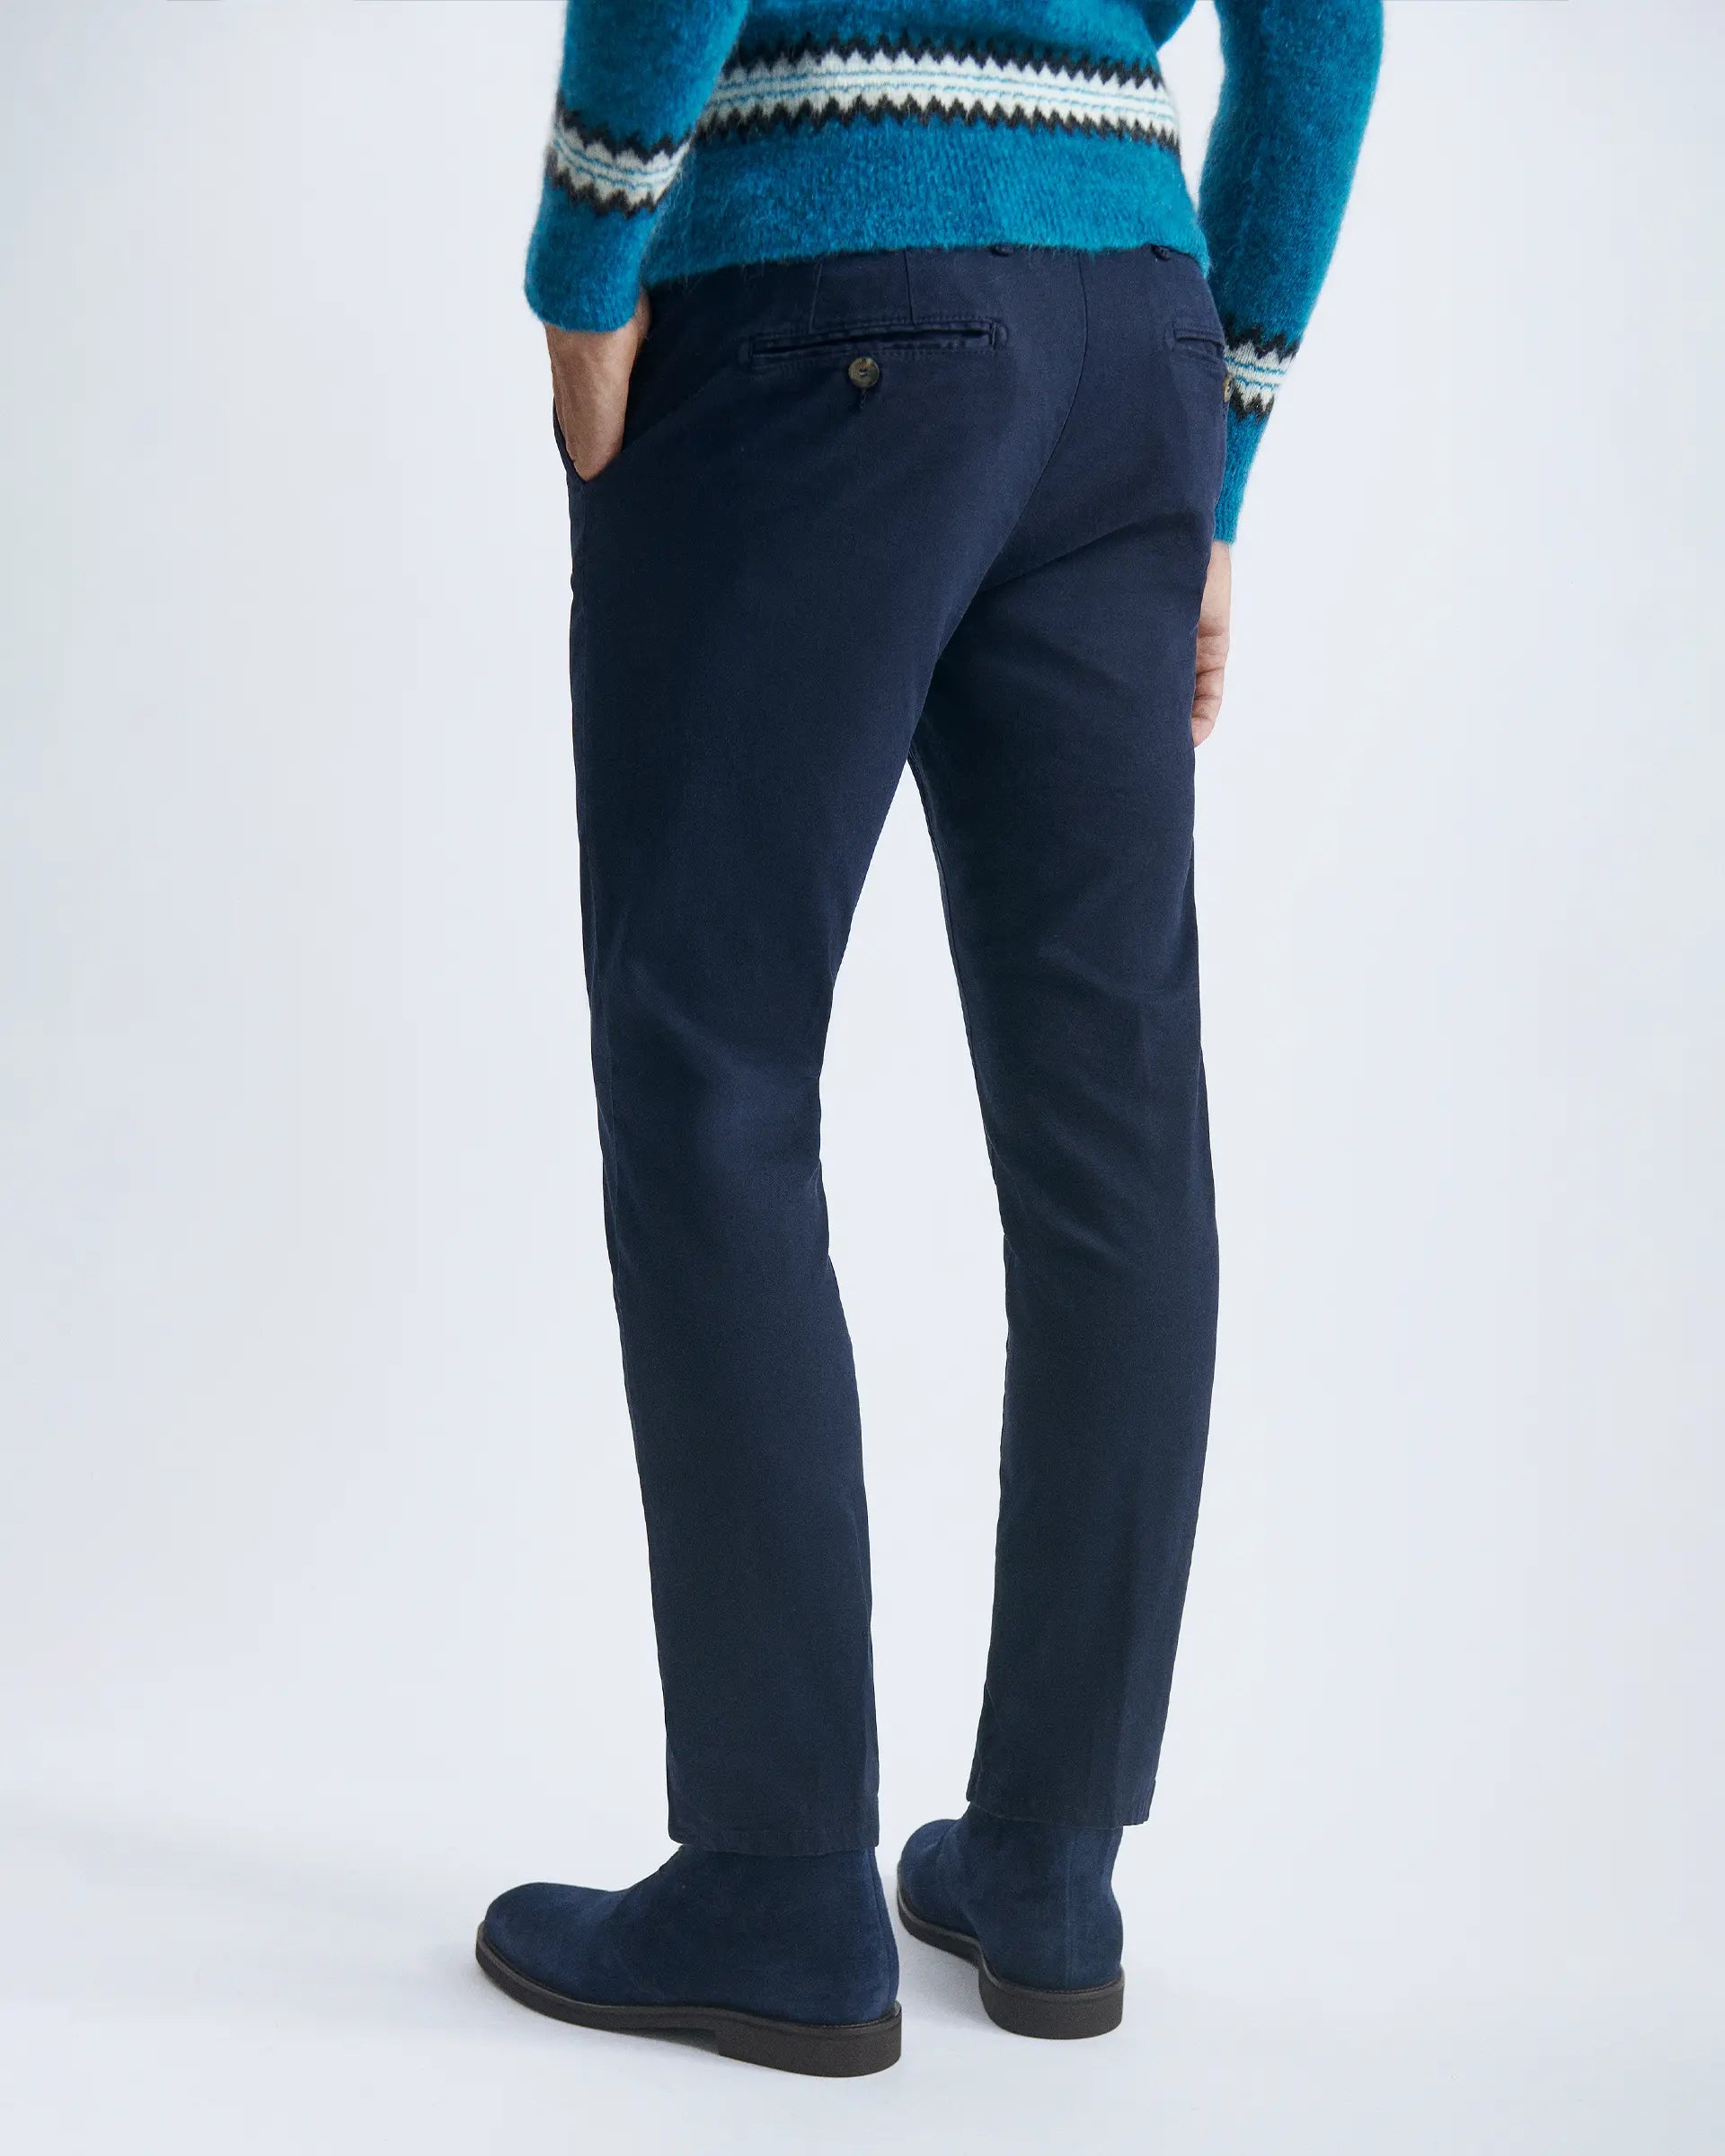 Navy trousers in garment-dyed stretch cotton